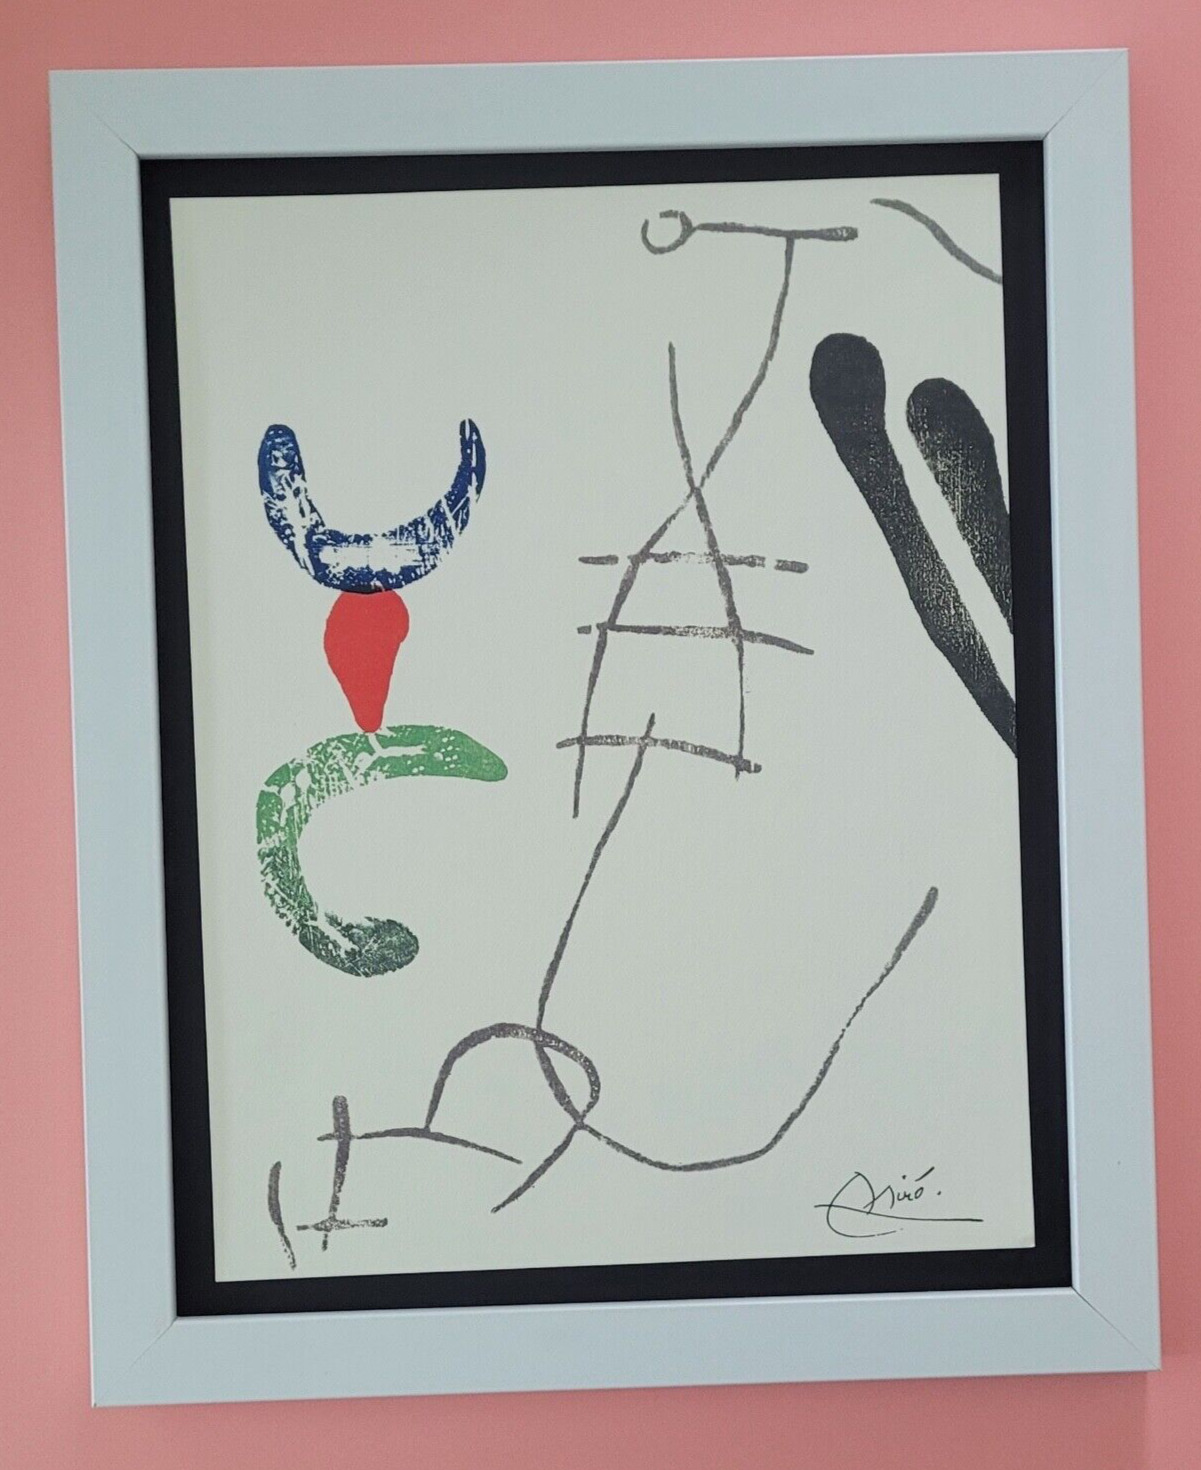 JOAN MIRO + 1971 BEAUTIFUL SIGNED PRINT MOUNTED AND FRAMED 11x14in + BUY NOW